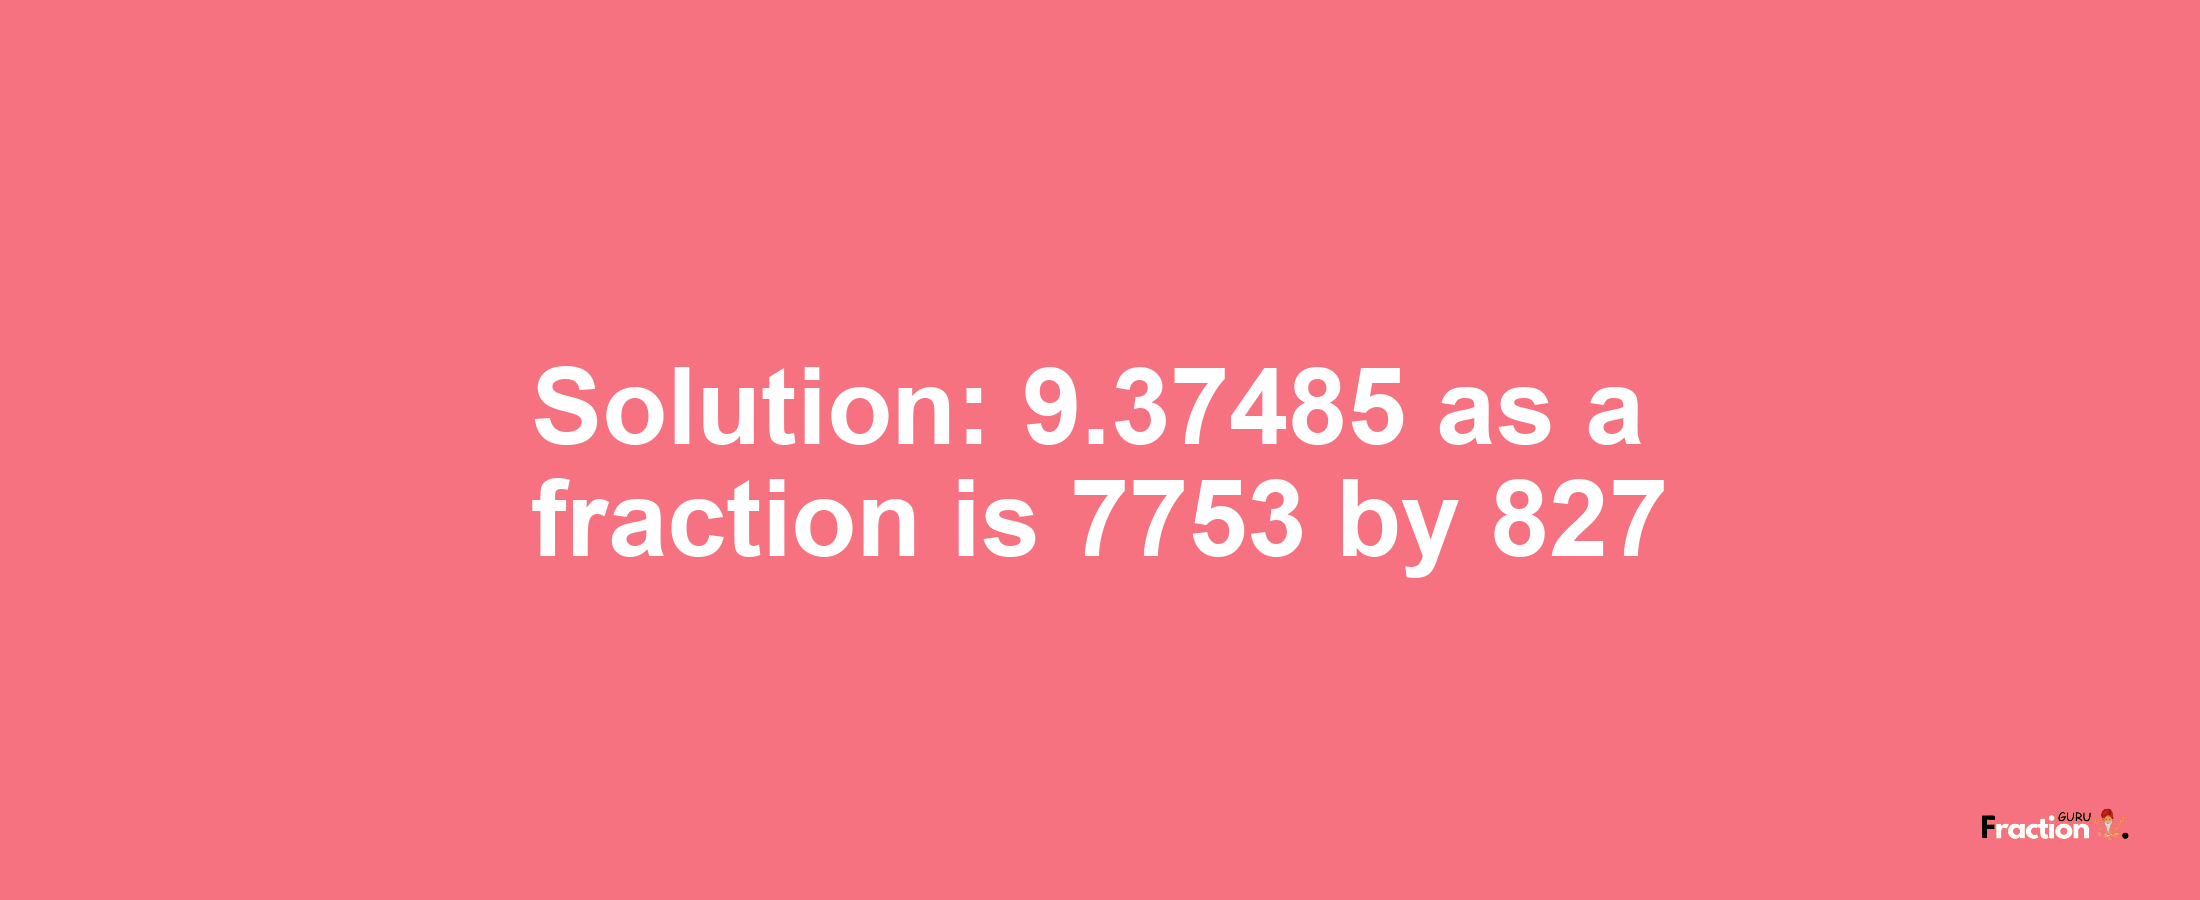 Solution:9.37485 as a fraction is 7753/827